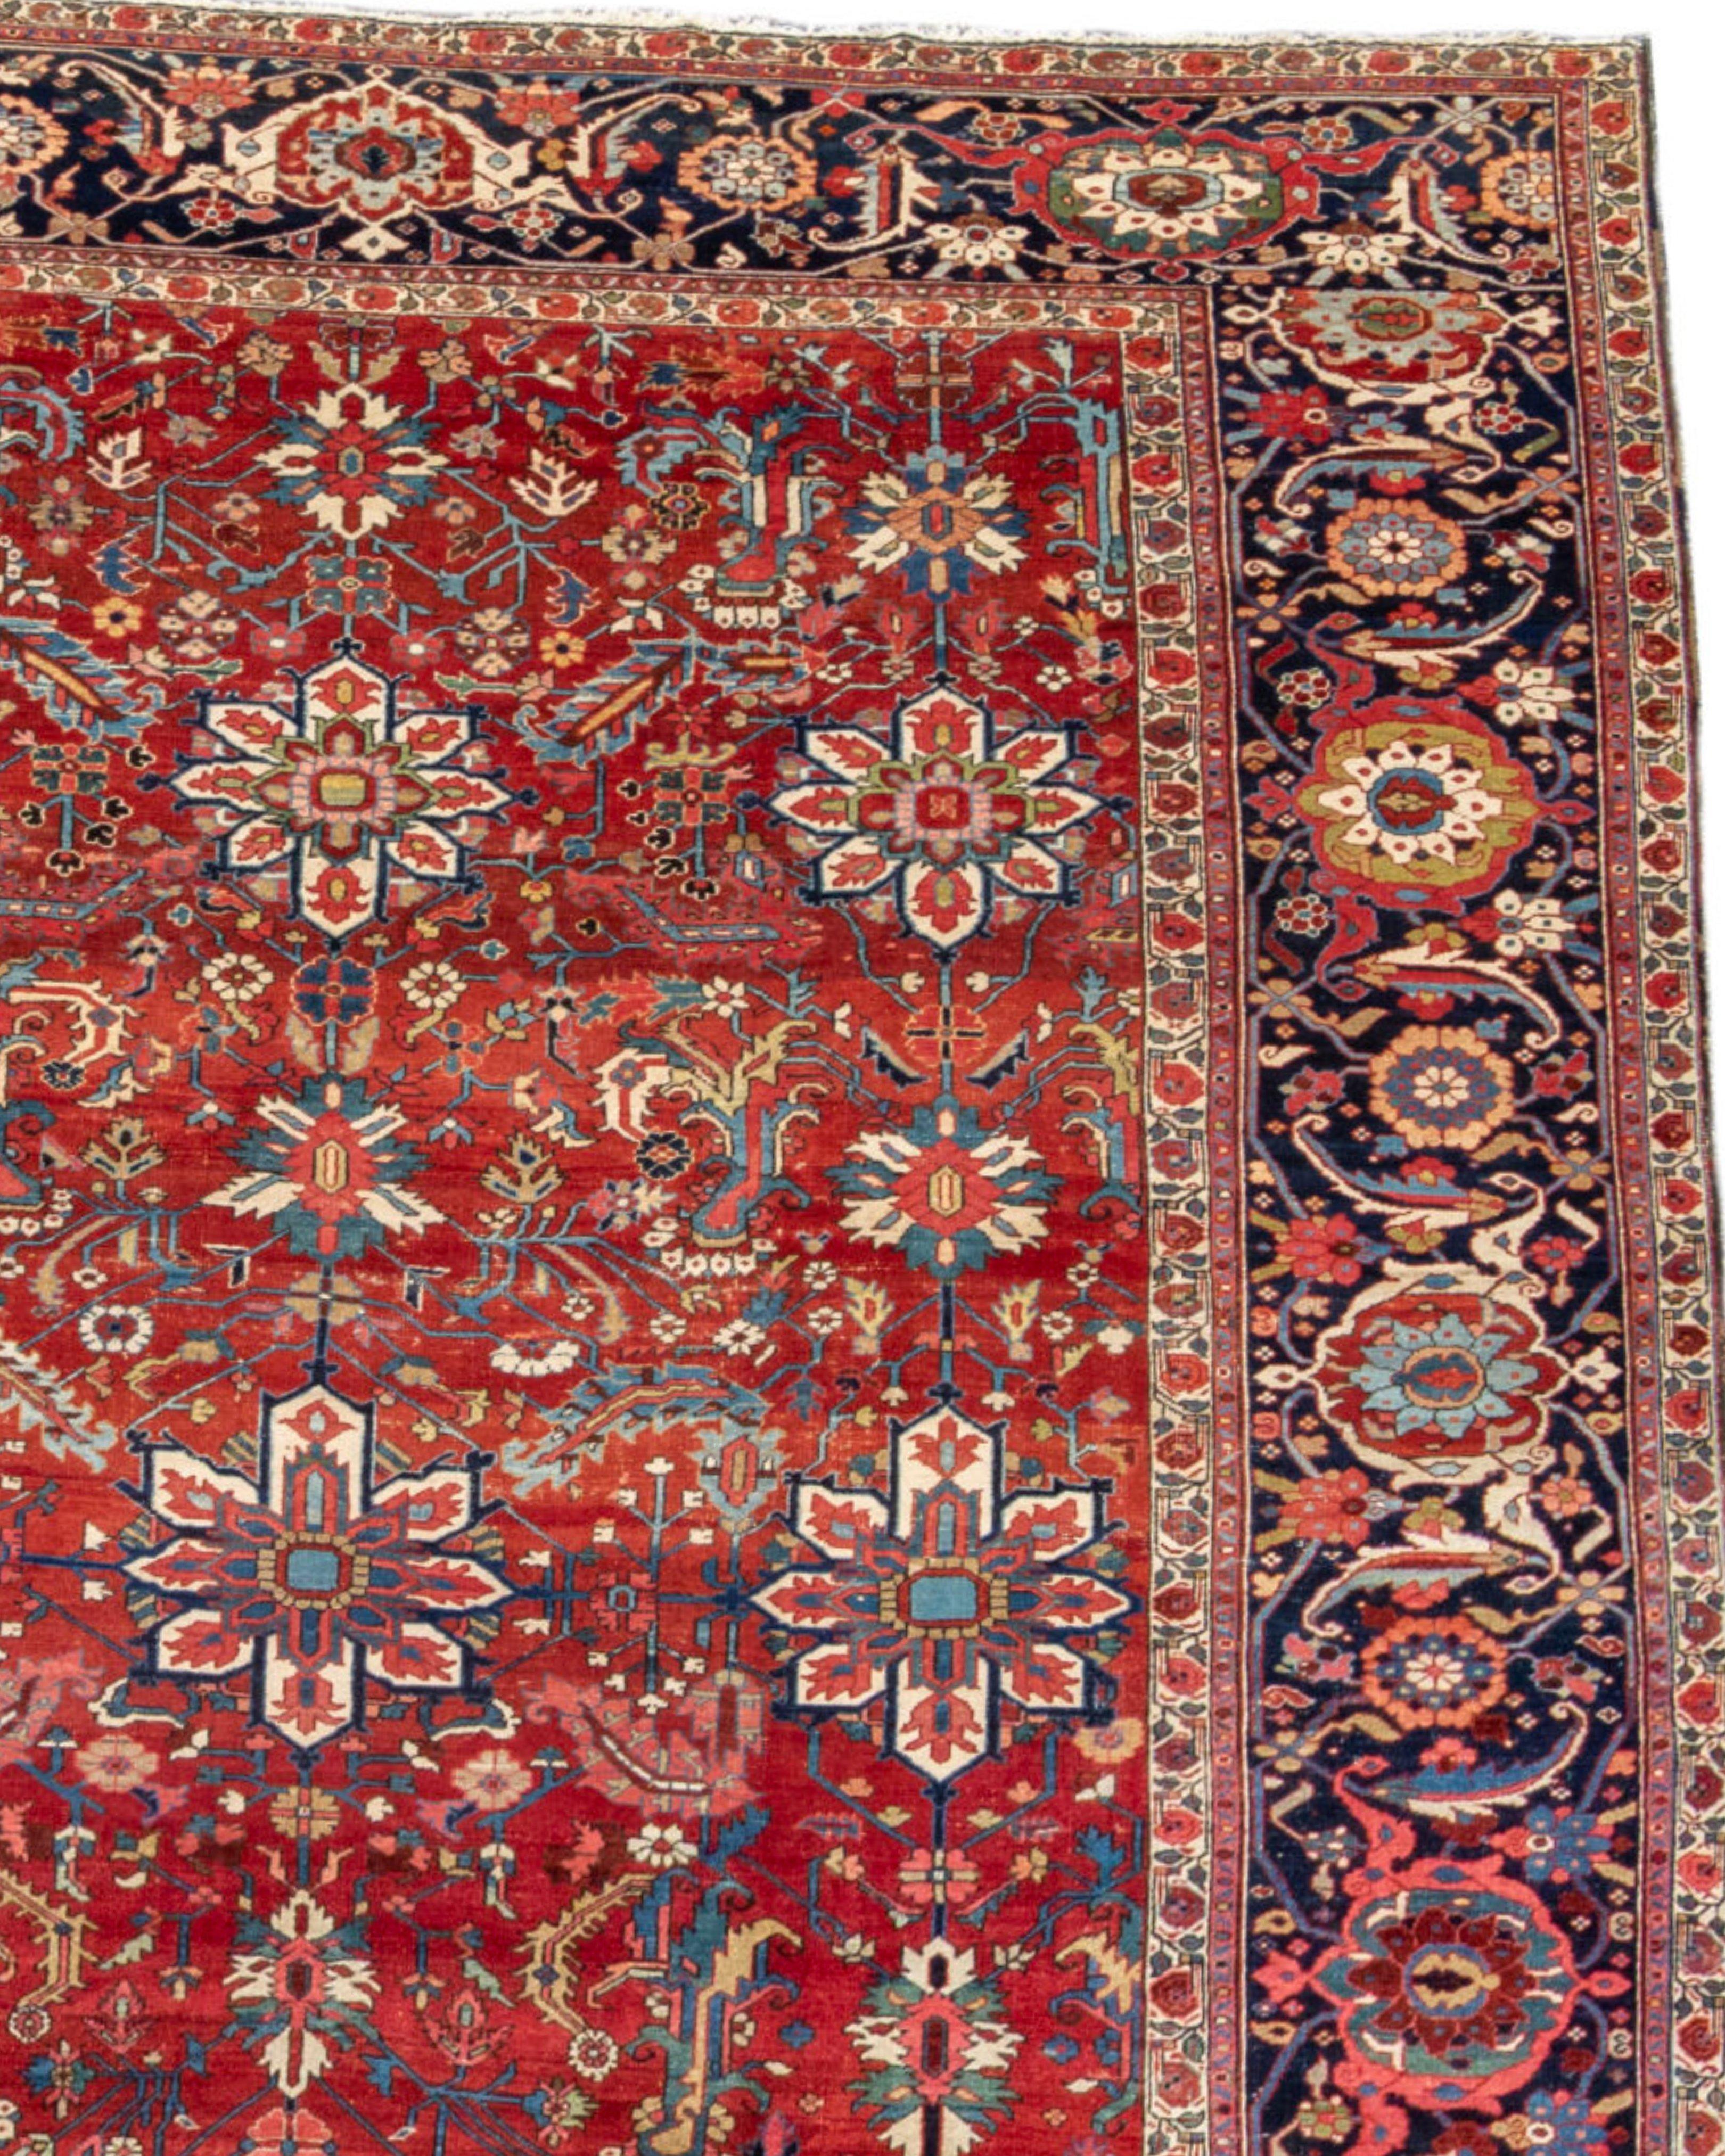 Antique Large Oversized Persian Heriz Carpet, Late 19th Century

Additional Information
Dimensions: 12'5